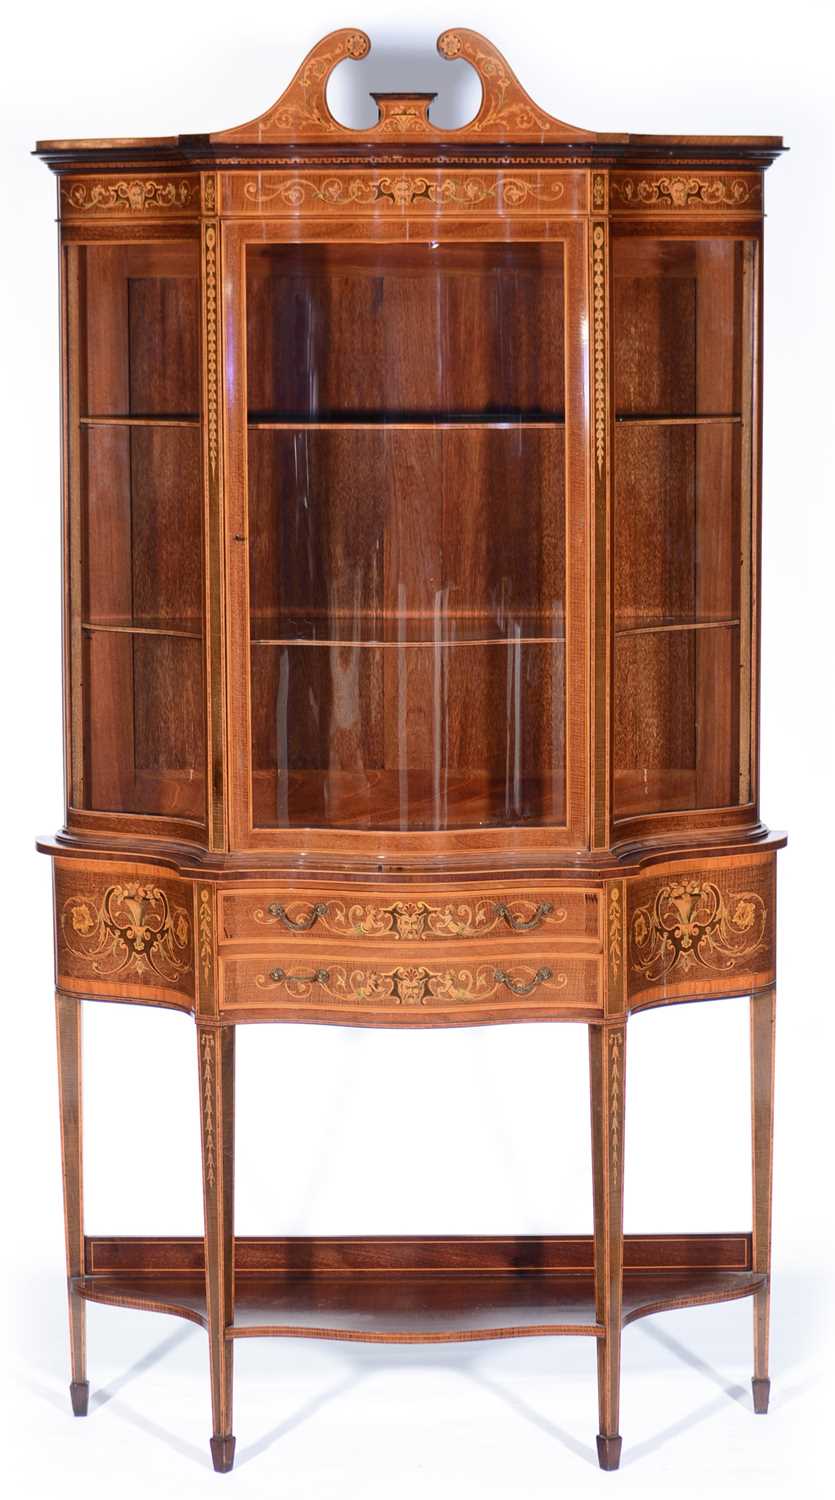 Lot 632 - Late 19th Century mahogany and inlaid display case by Patterson, Smith & Innes, Edinburgh